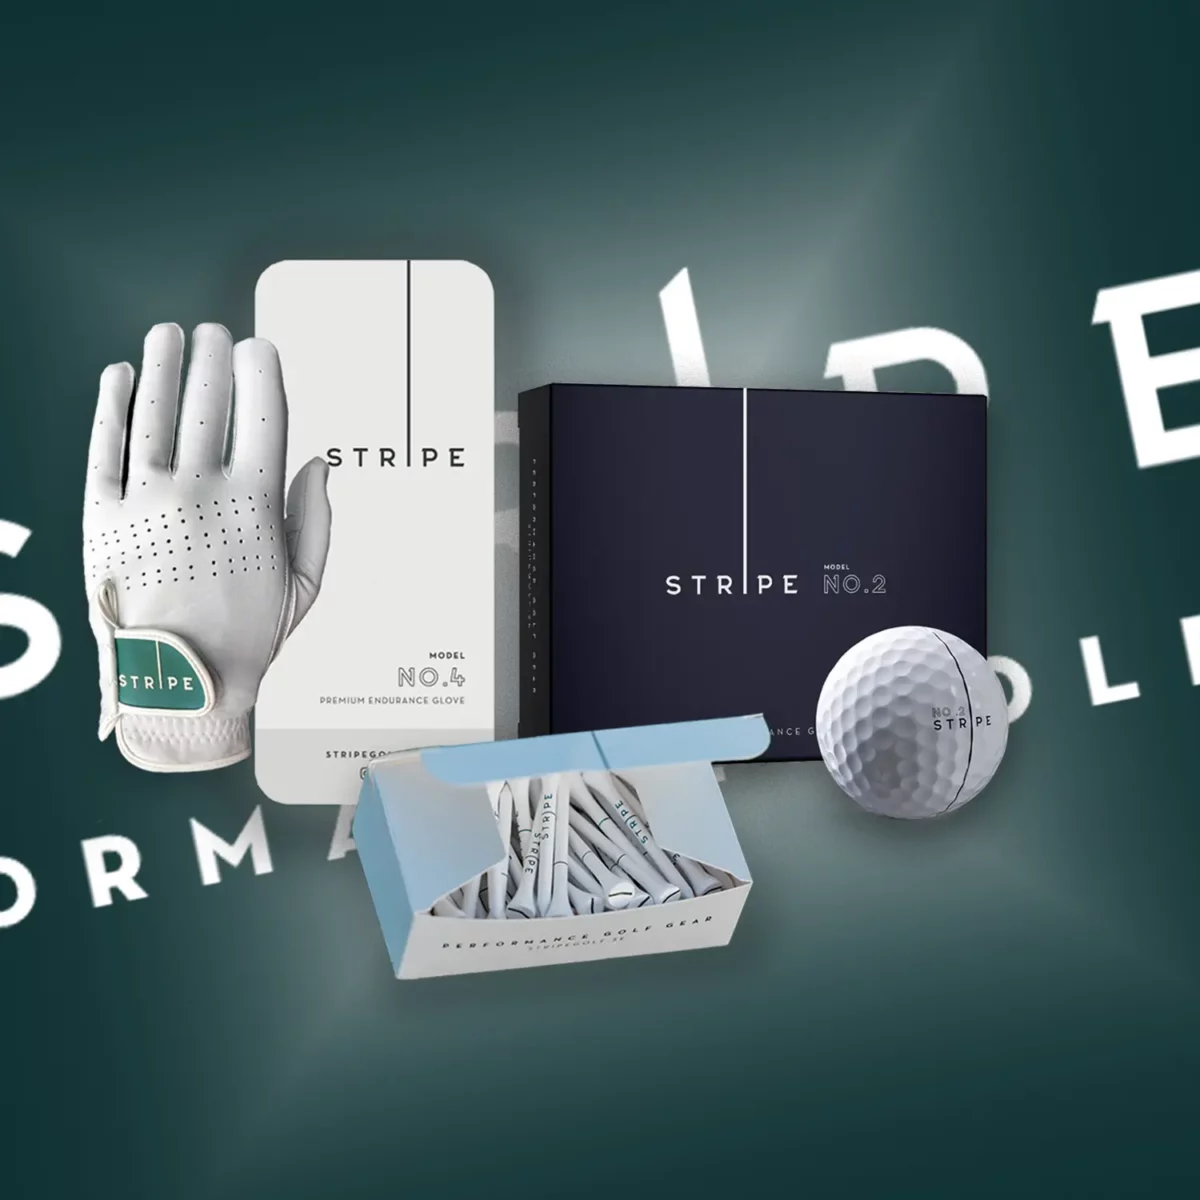 Season starter package - Bundle offer with golf gloves, golf balls and tees.